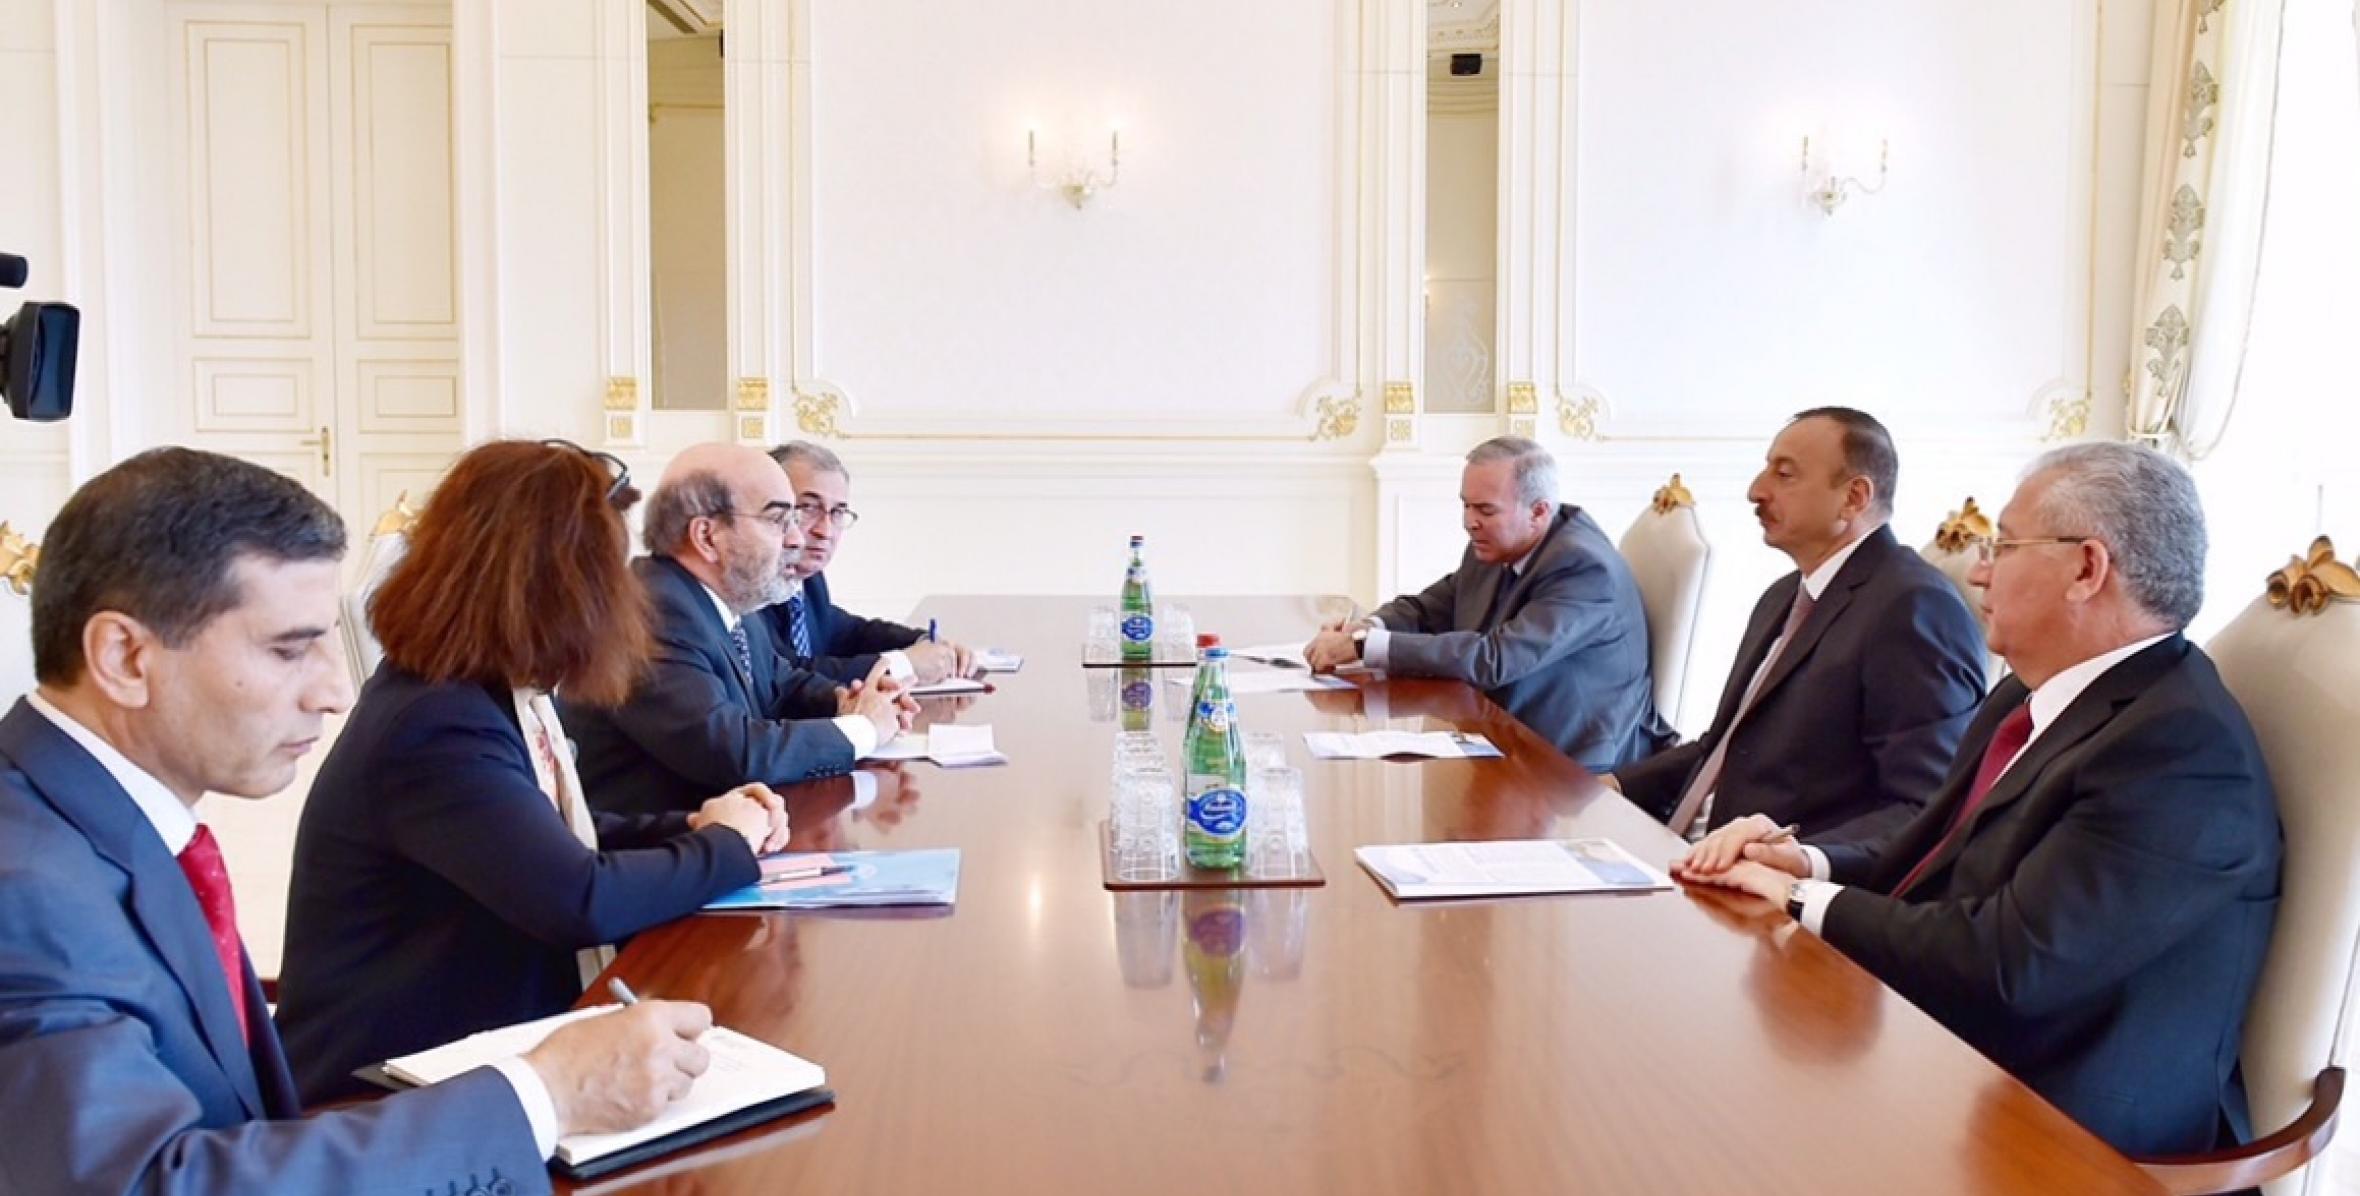 Ilham Aliyev received a delegation led by the Director-General of the Food and Agriculture Organization of the United Nations